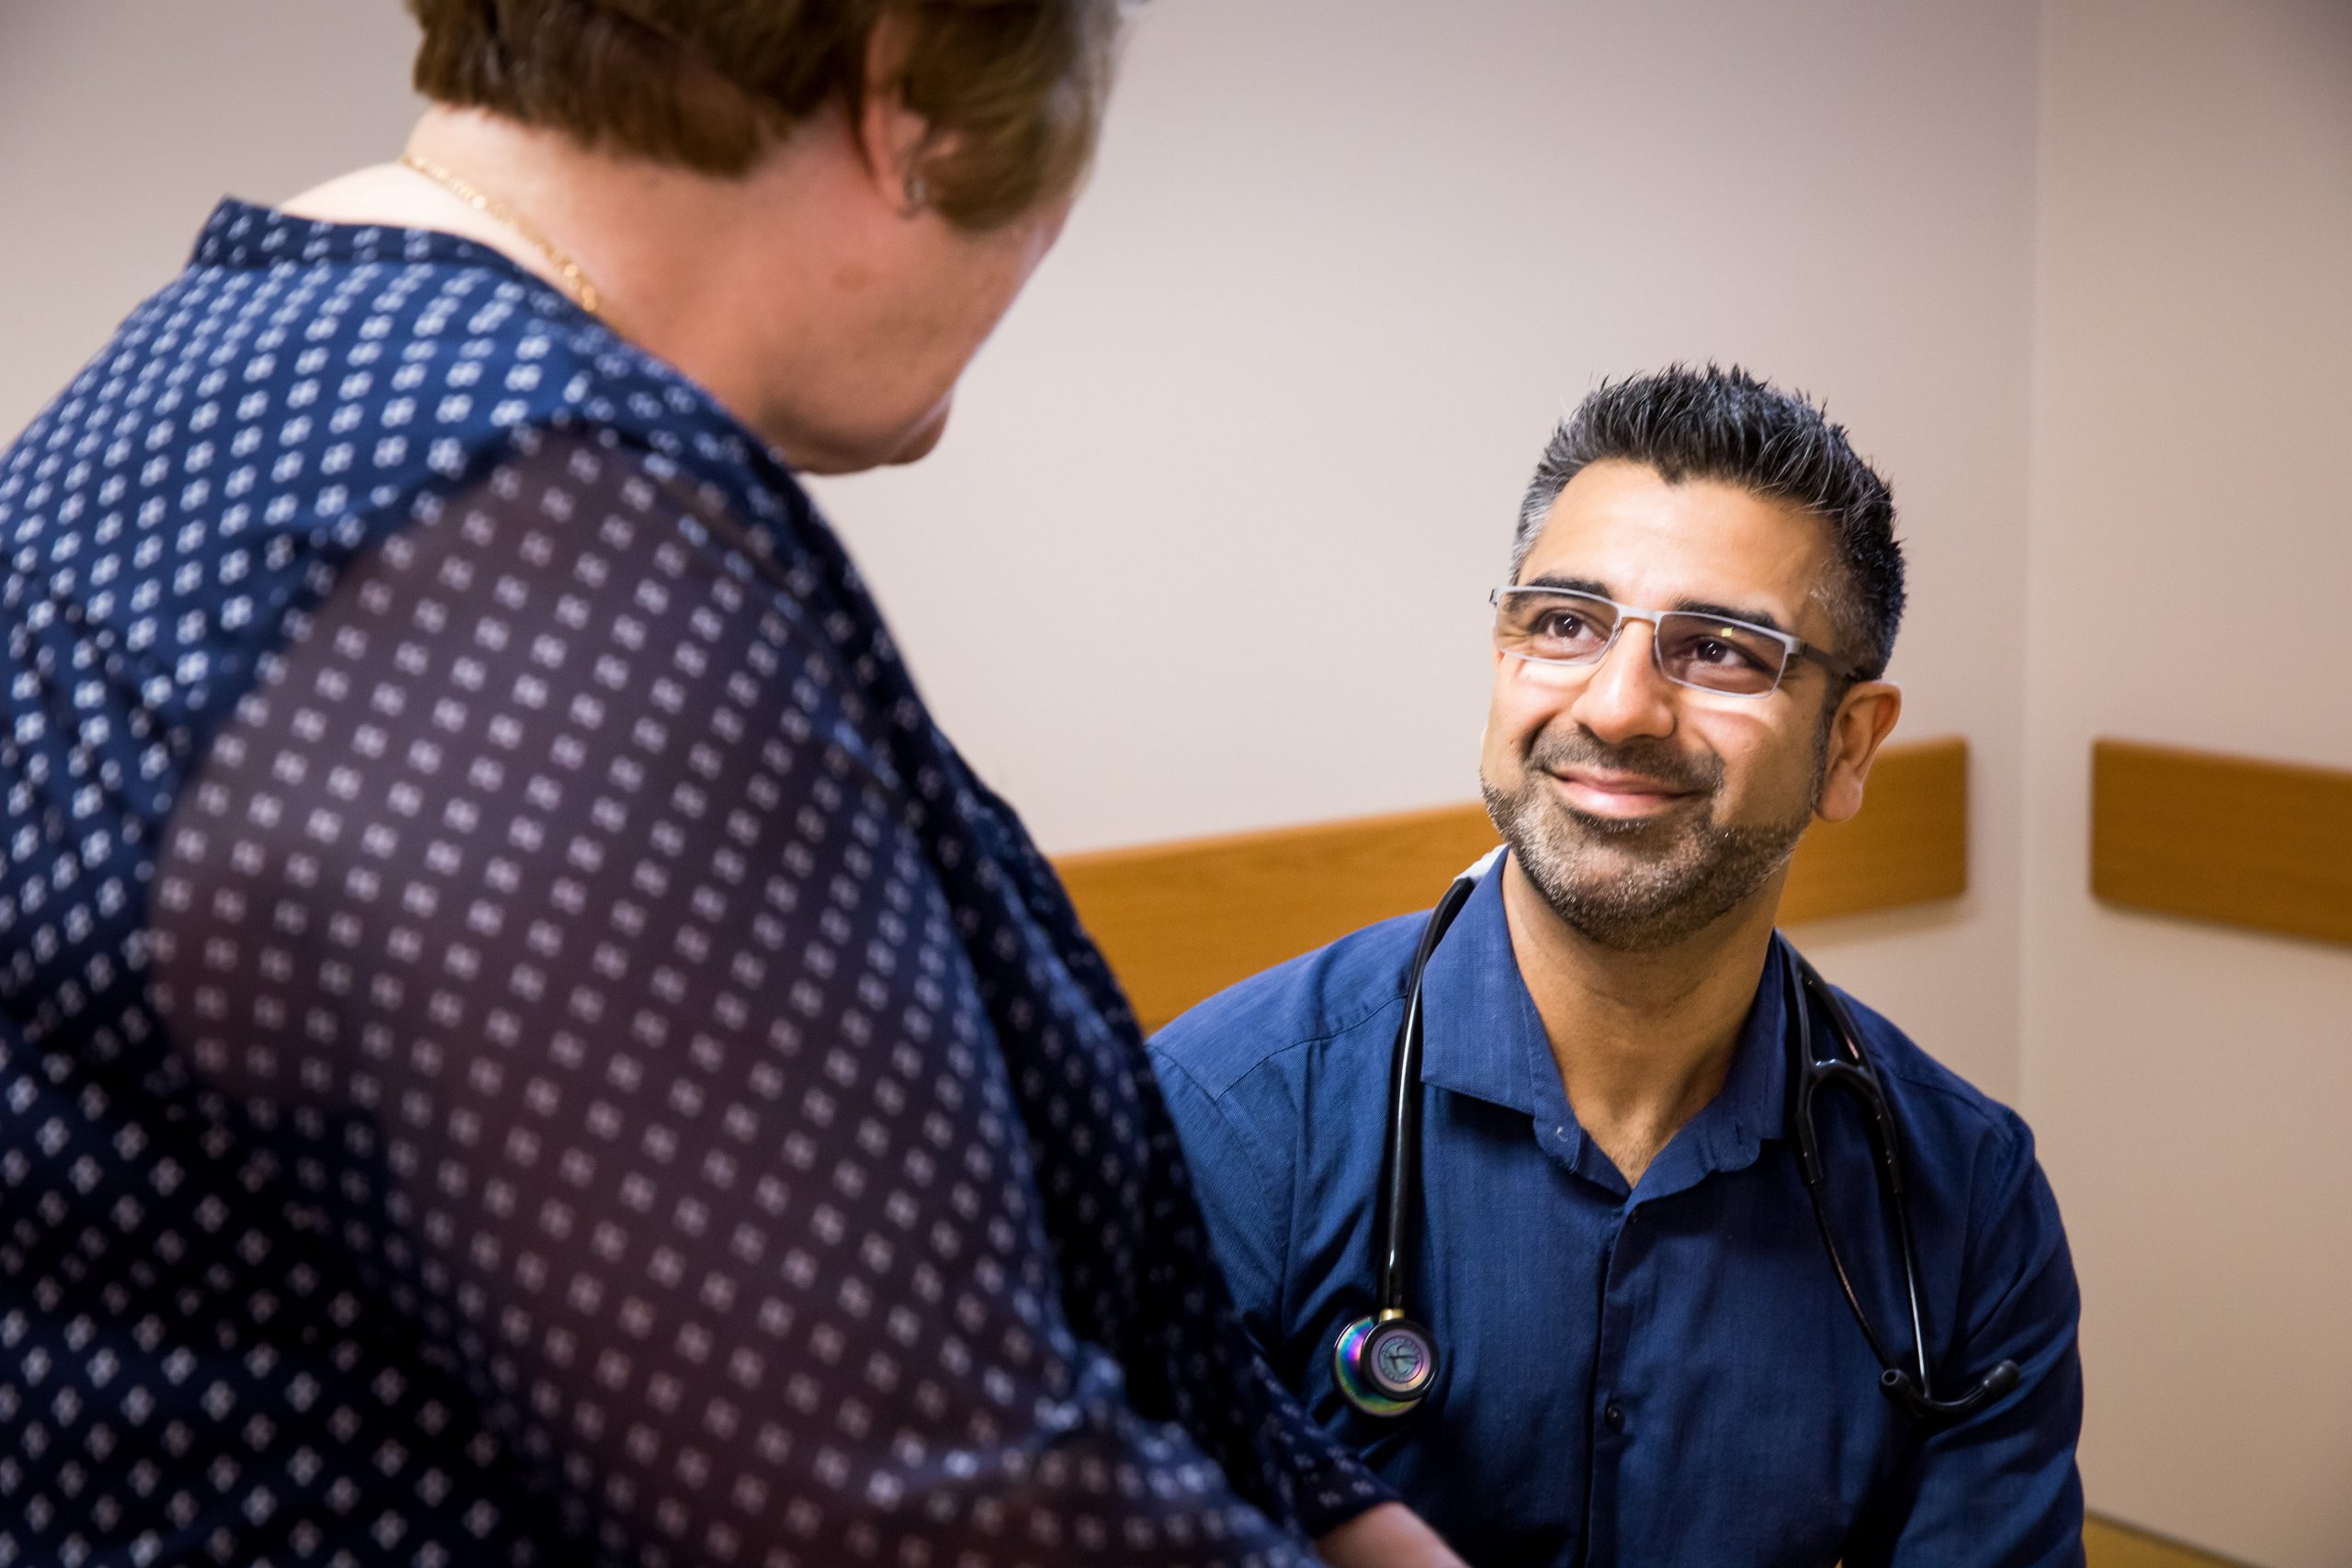 A man with short hair and glasses wearing a stethoscope looks up at a woman smiling.